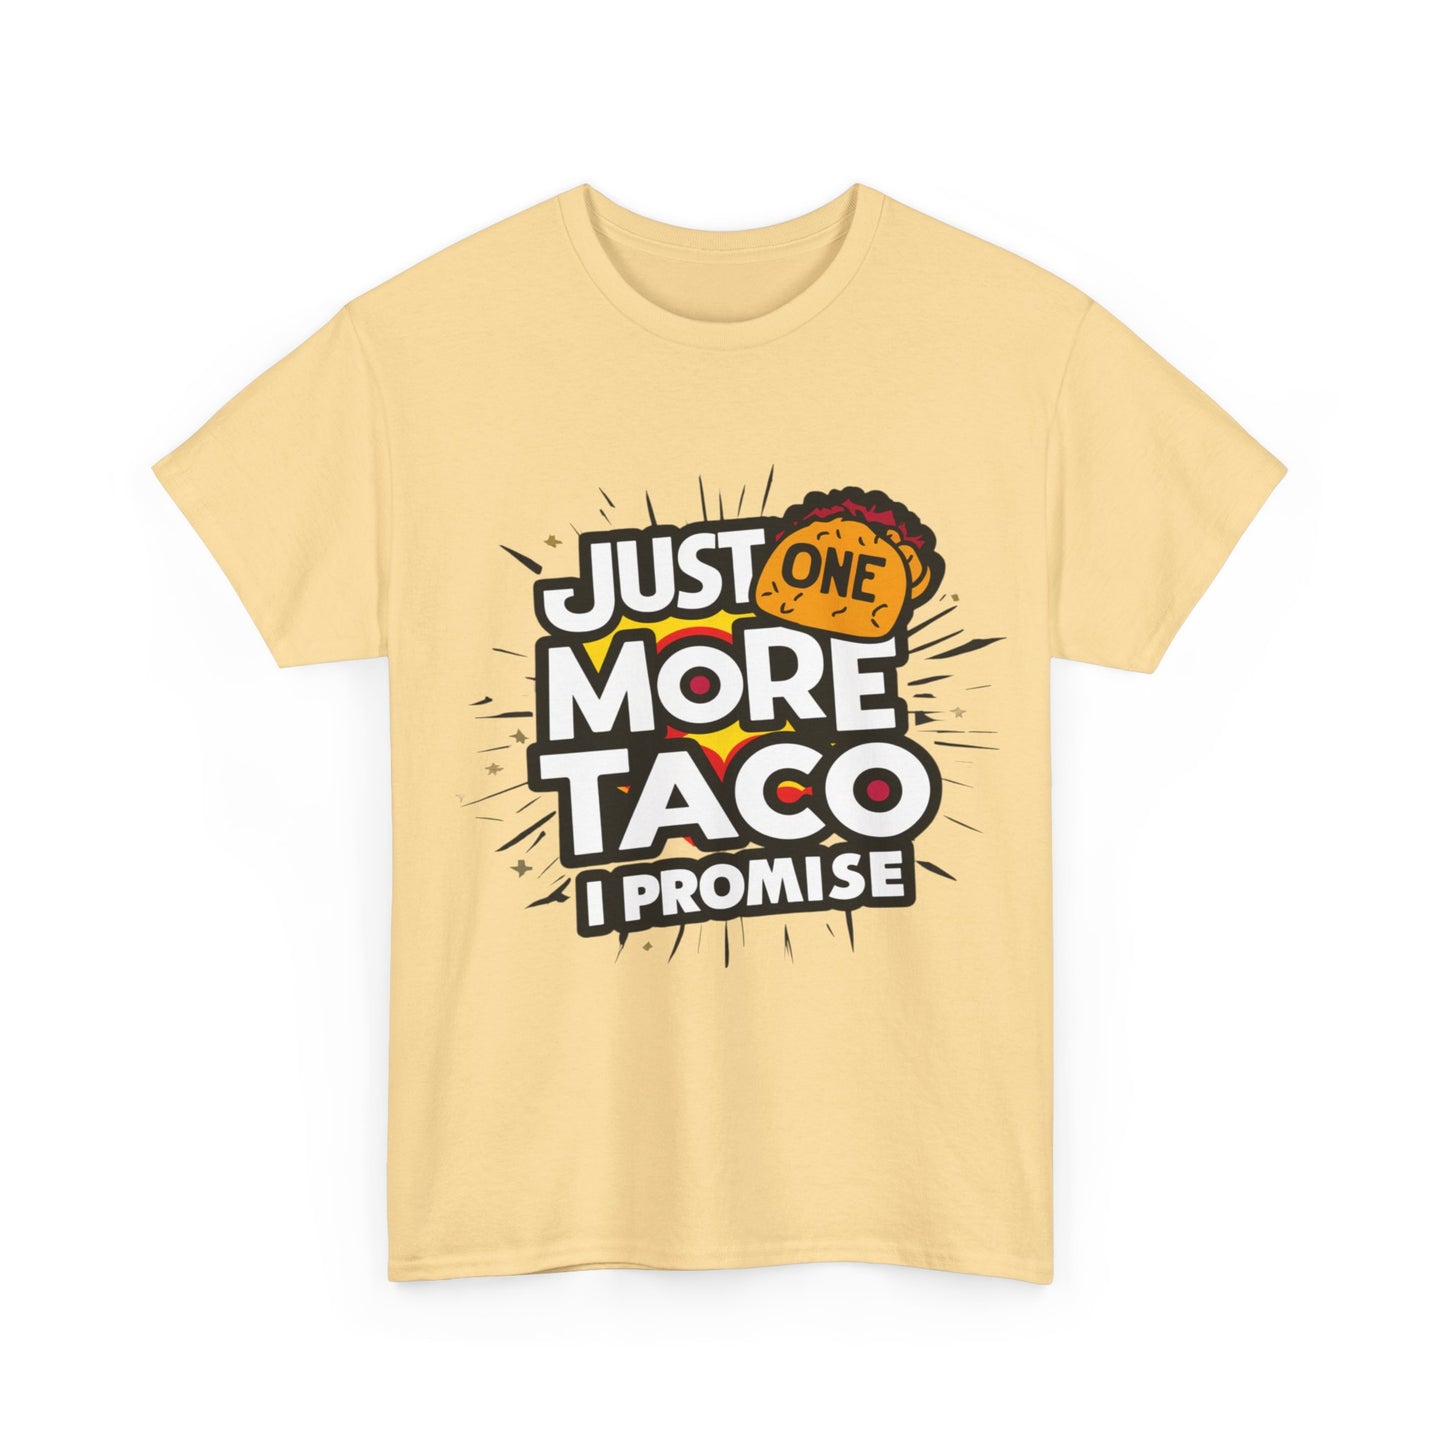 Copy of Just One More Taco I Promise Mexican Food Graphic Unisex Heavy Cotton Tee Cotton Funny Humorous Graphic Soft Premium Unisex Men Women Yellow Haze T-shirt Birthday Gift-45